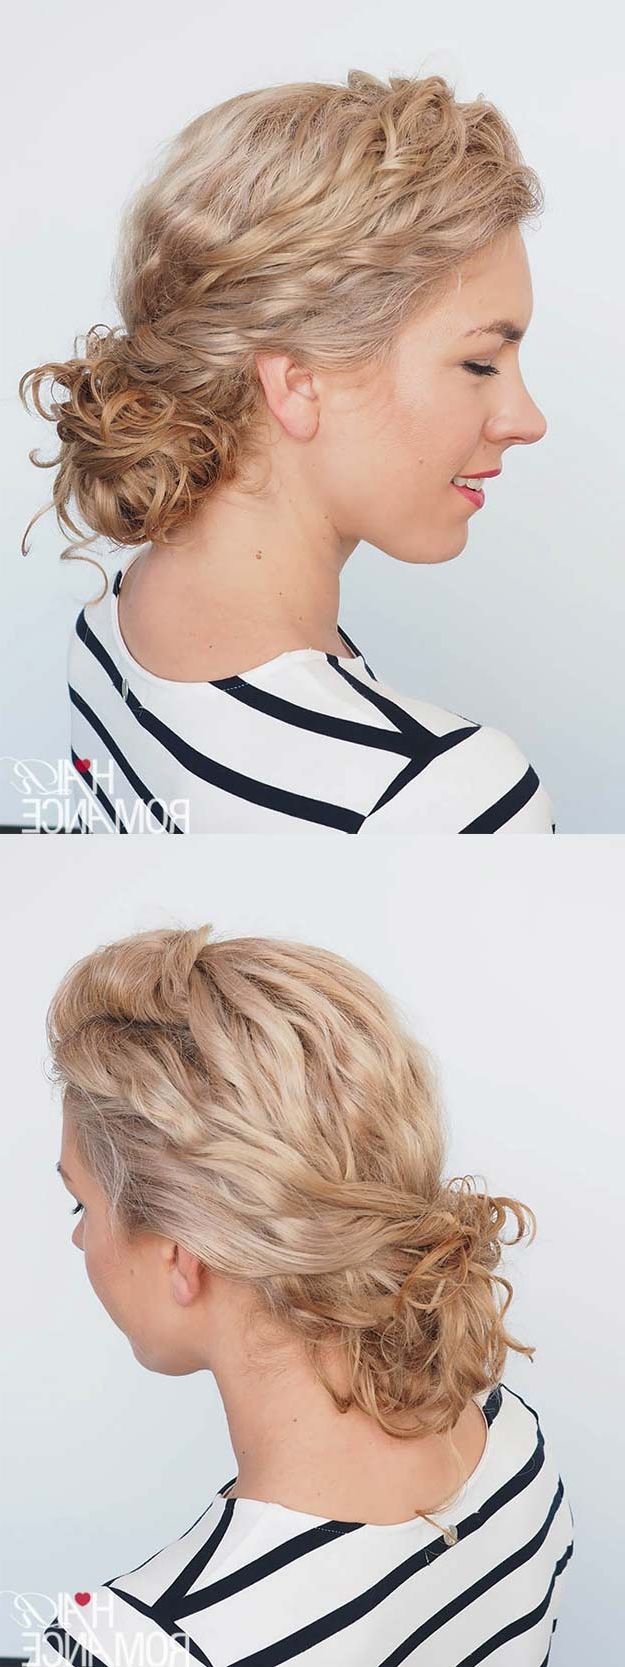 33 Best Hairstyles For Your 20s – The Goddess Throughout Short Haircuts For Women In 20s (Photo 2 of 25)